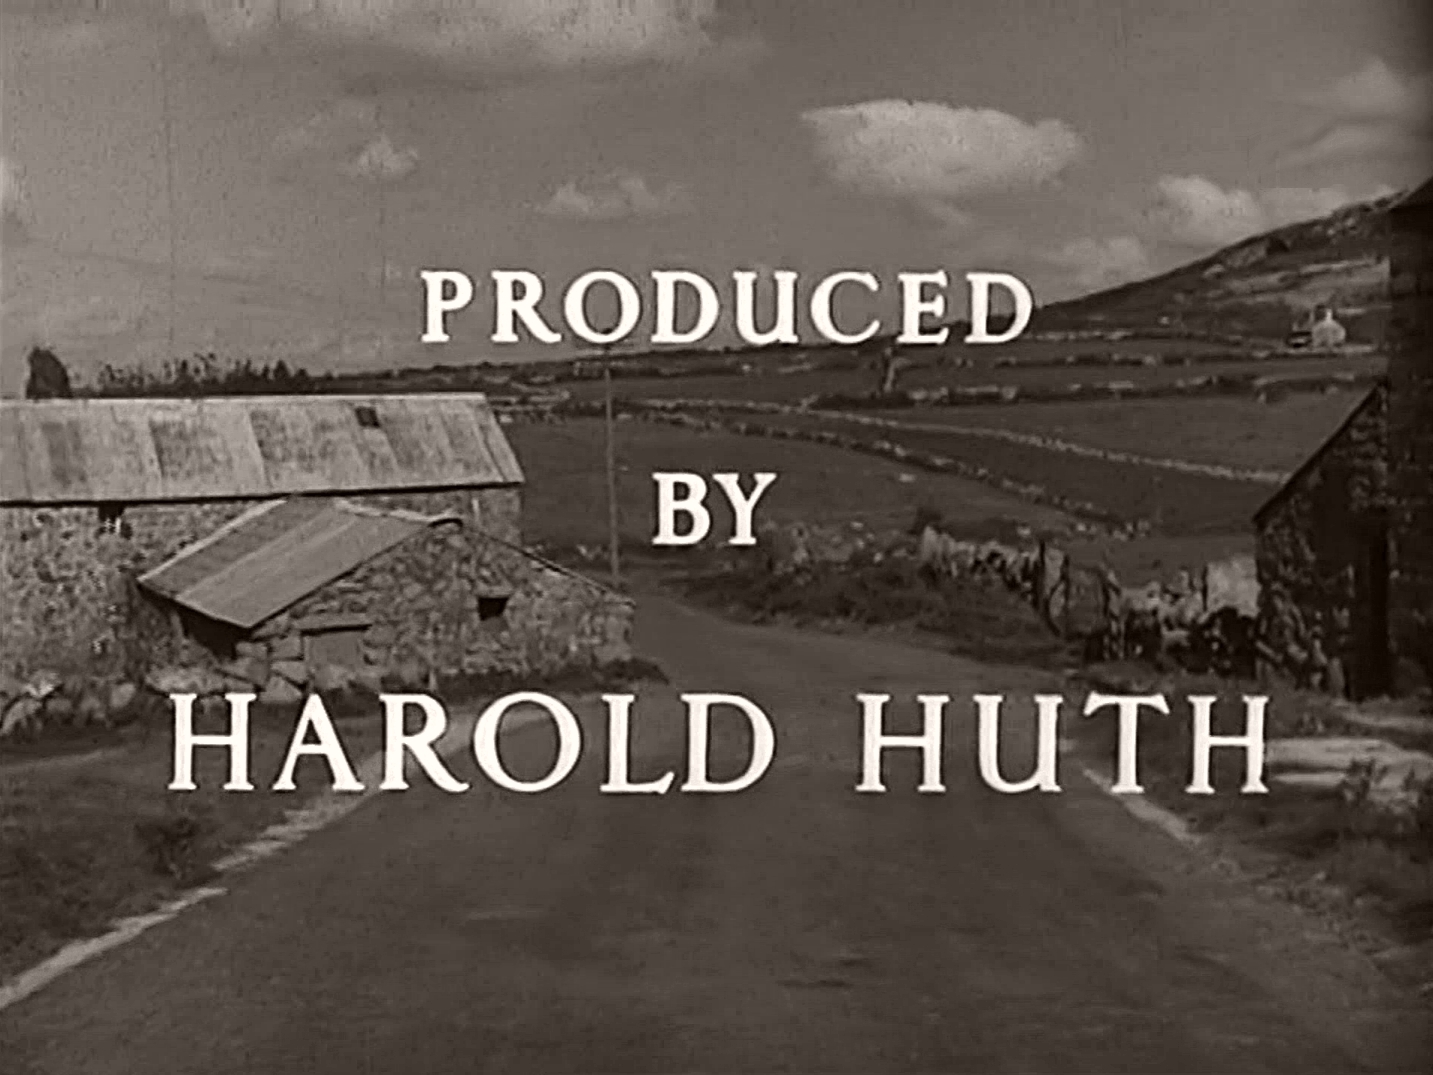 Main title from Love Story (1944) (11). Produced by Harold Huth